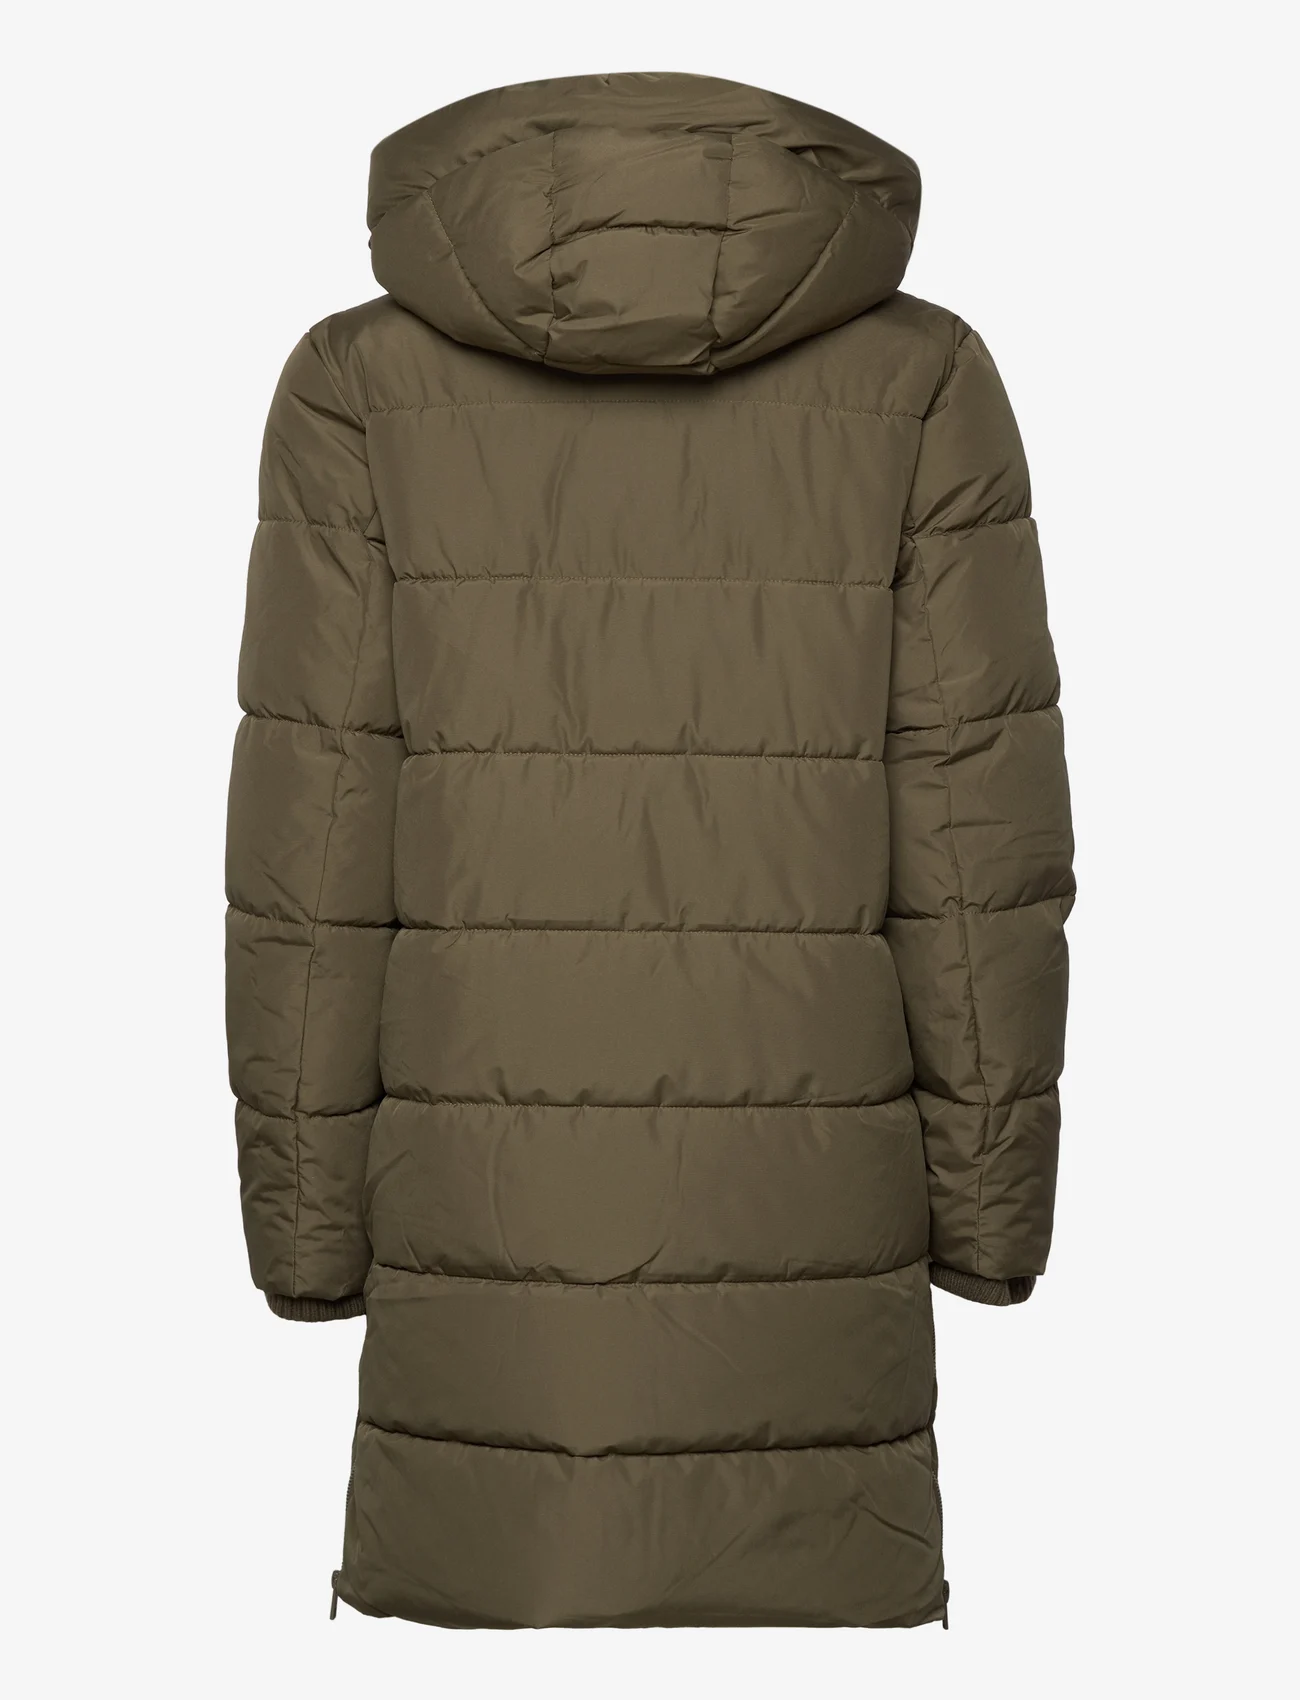 Esprit Casual - Quilted coat with rib knit details - winter jackets - dark khaki - 1